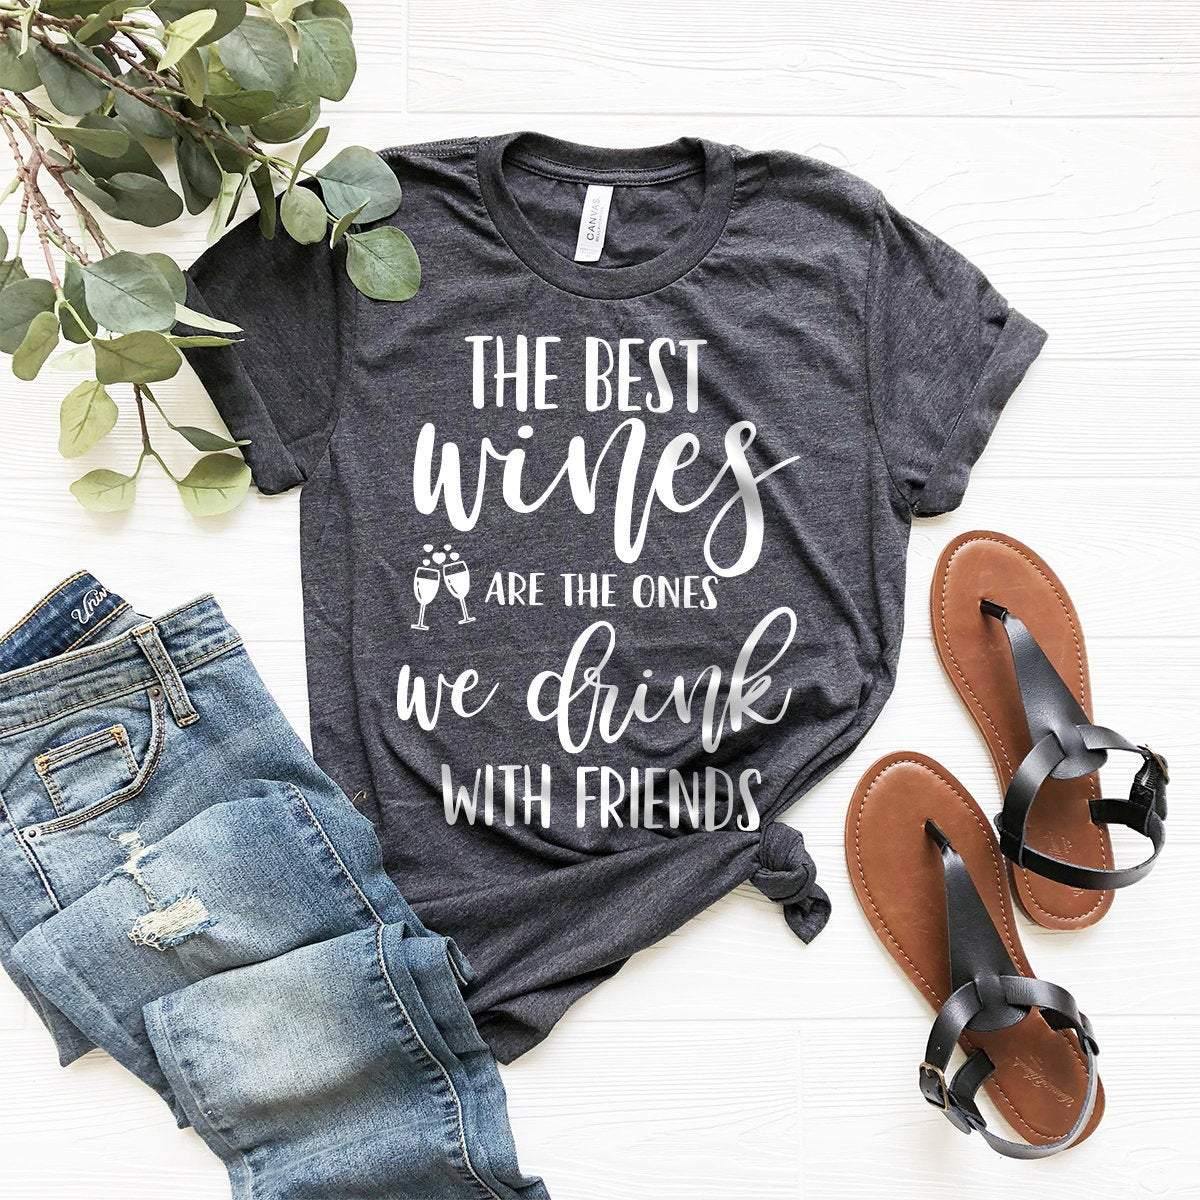 We Drink With Friends Shirt,Wine Shirt,Wine Lover Shirt,Wine Tee,Funny Wine Shirt,Drinking Shirt,Gift For Wine Lover - Fastdeliverytees.com